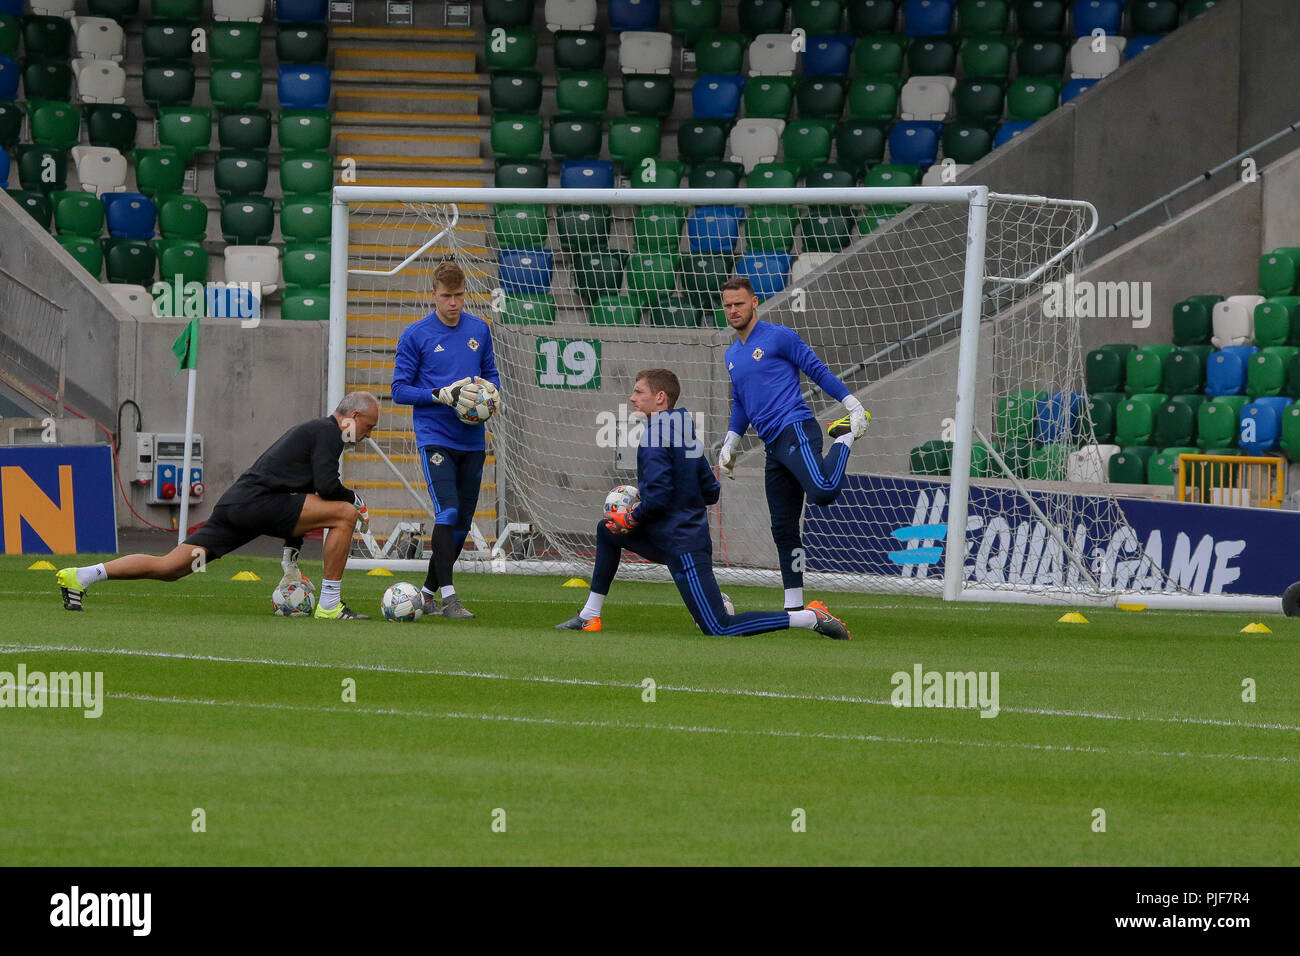 Windsor Park, Belfast, Northern Ireland. 07 September 2018. Northern Ireland in training this morning at Windsor Park before tomorrow night's UEFA Nations League at the stadium against Bosnia & Herzegovina. Northern ireland goalkeepers in training. Credit: David Hunter/Alamy Live News. Stock Photo